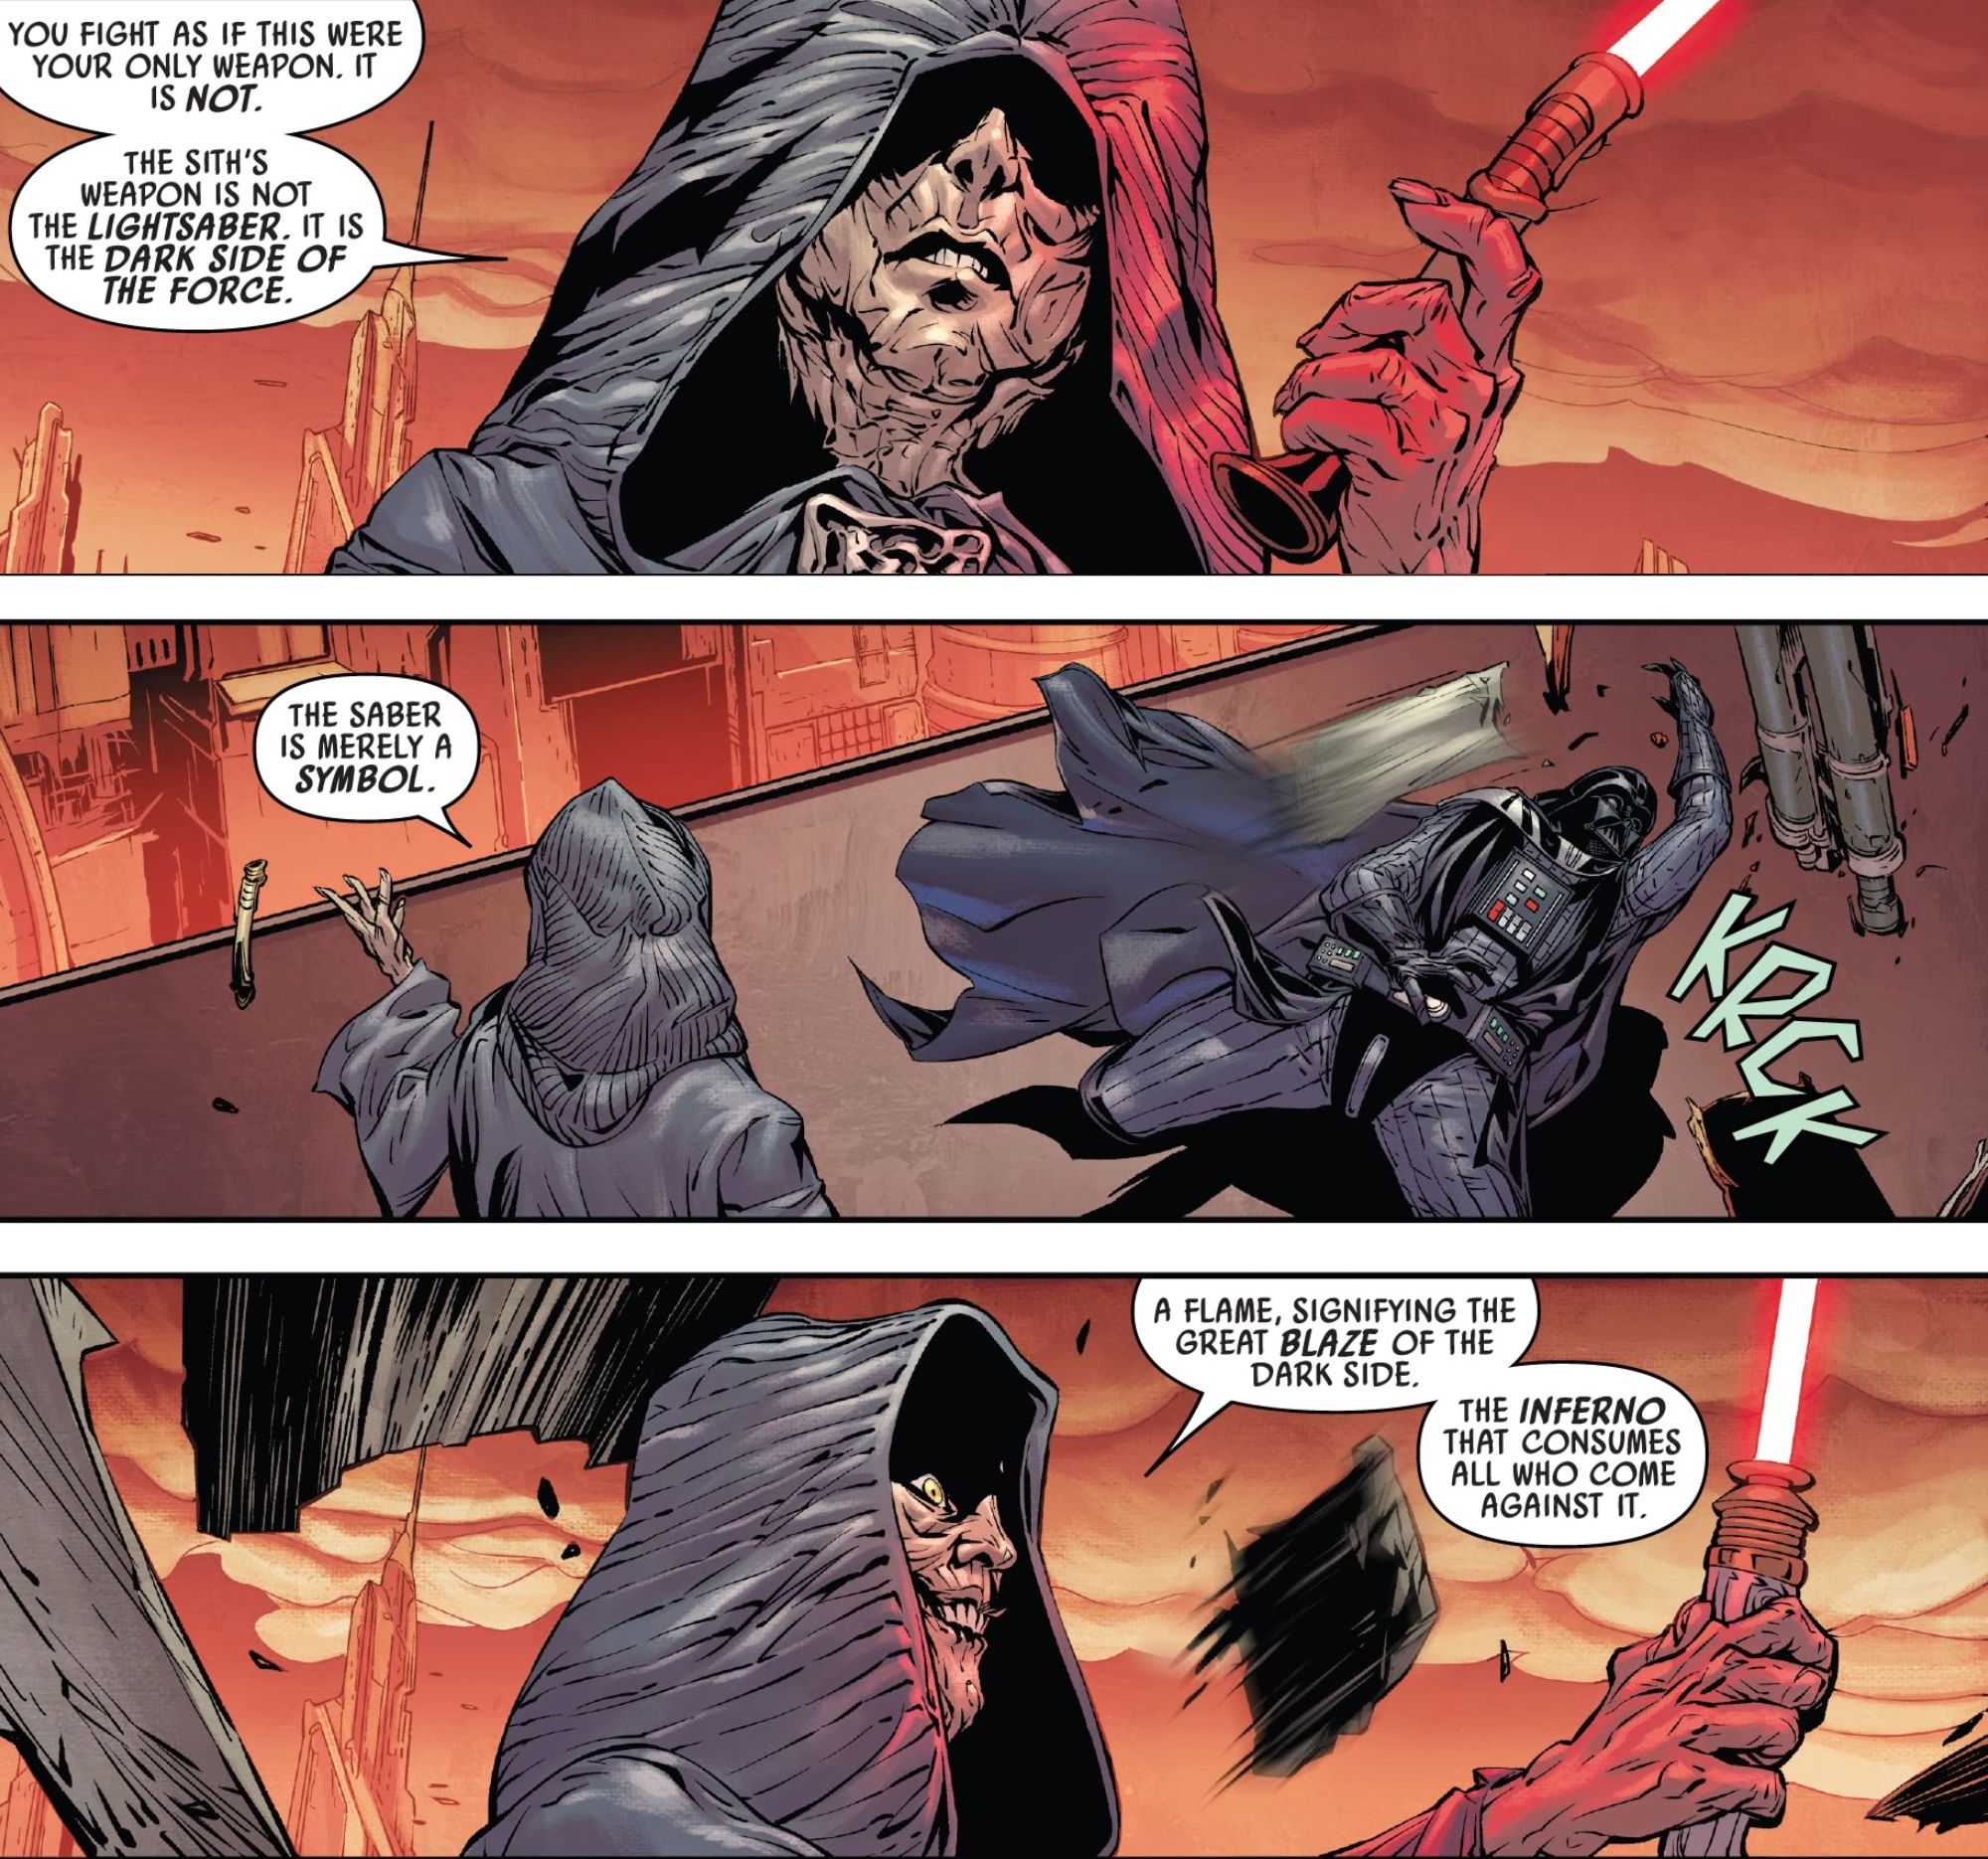 Palpatine Explains Sith Lightsabers In Star Wars #25